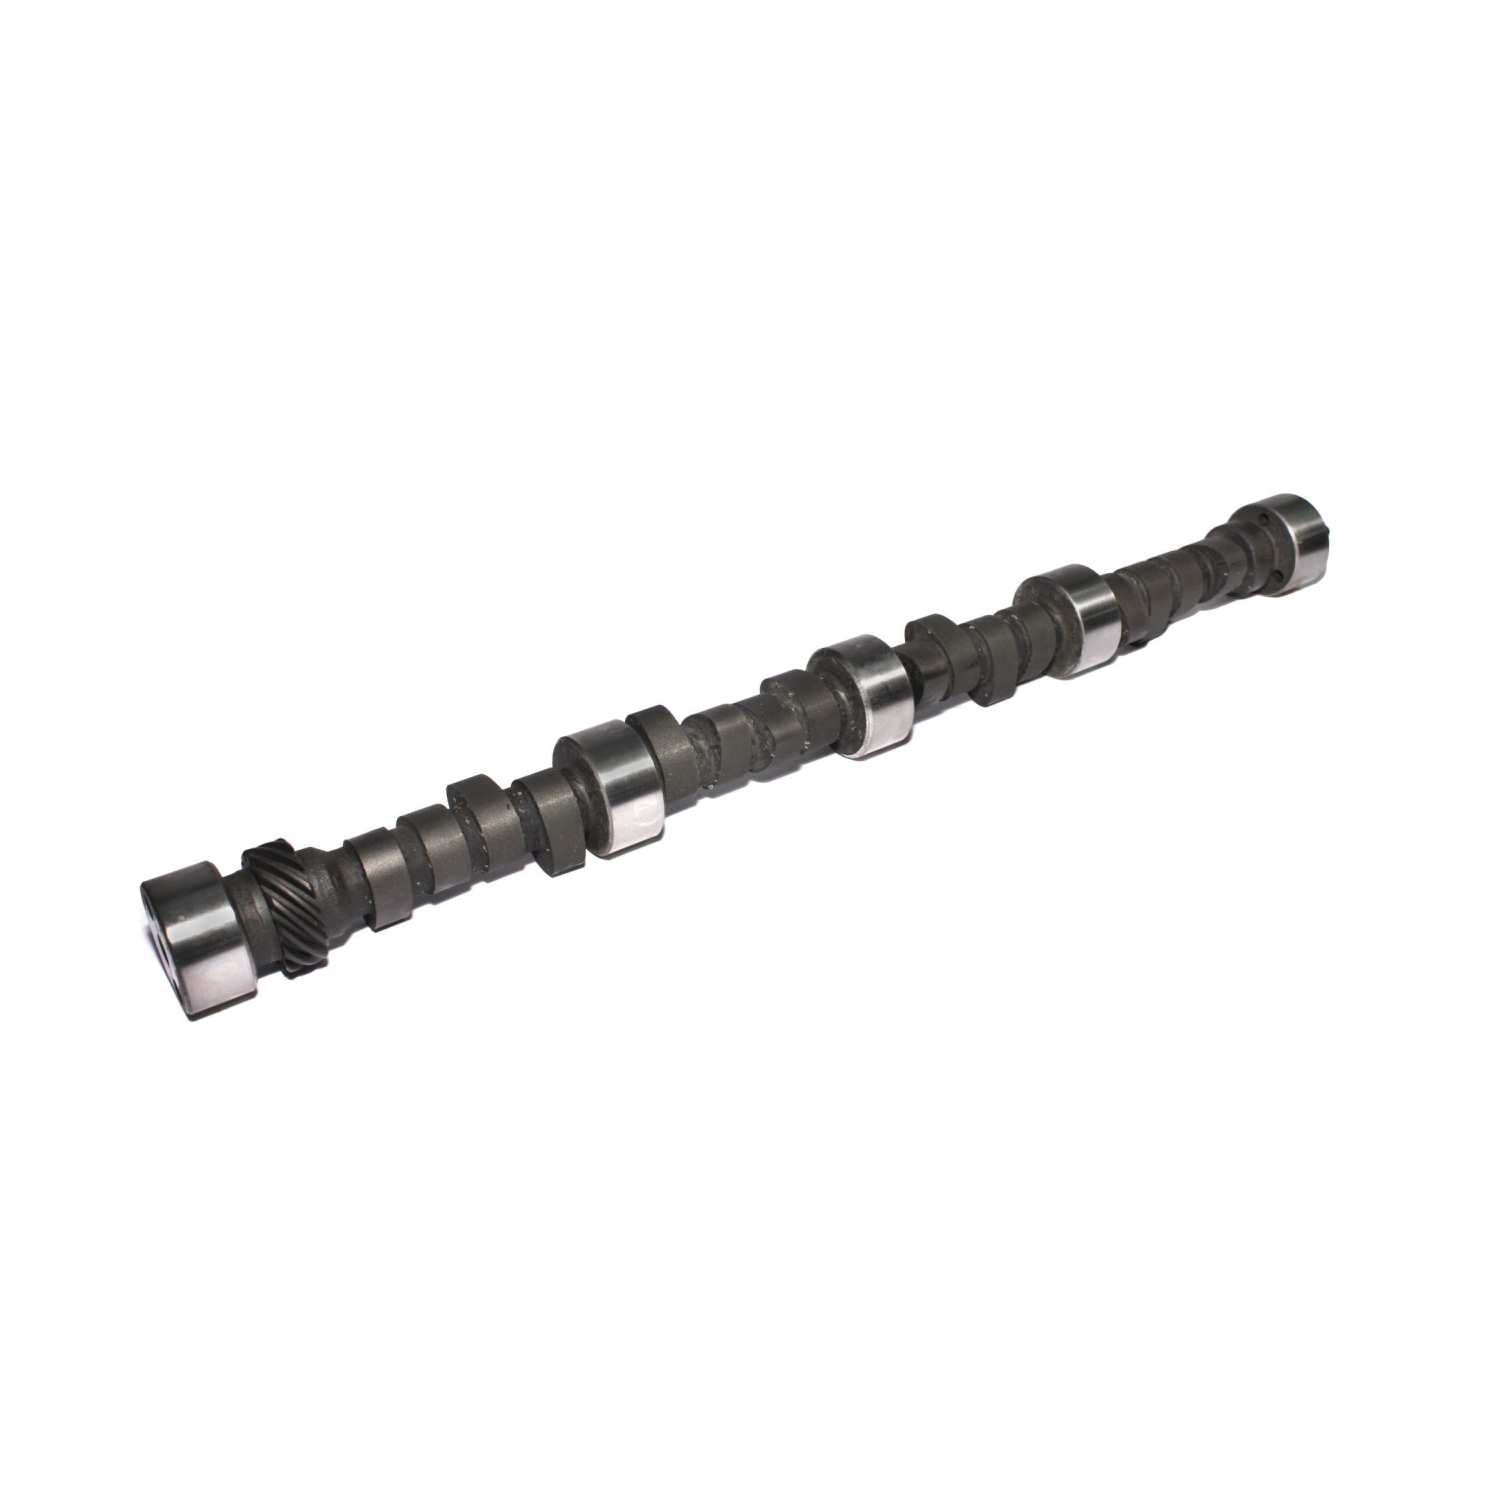 Competition Cams 11-652-47 Xtreme Energy 4/7 Swap Firing Order Camshaft